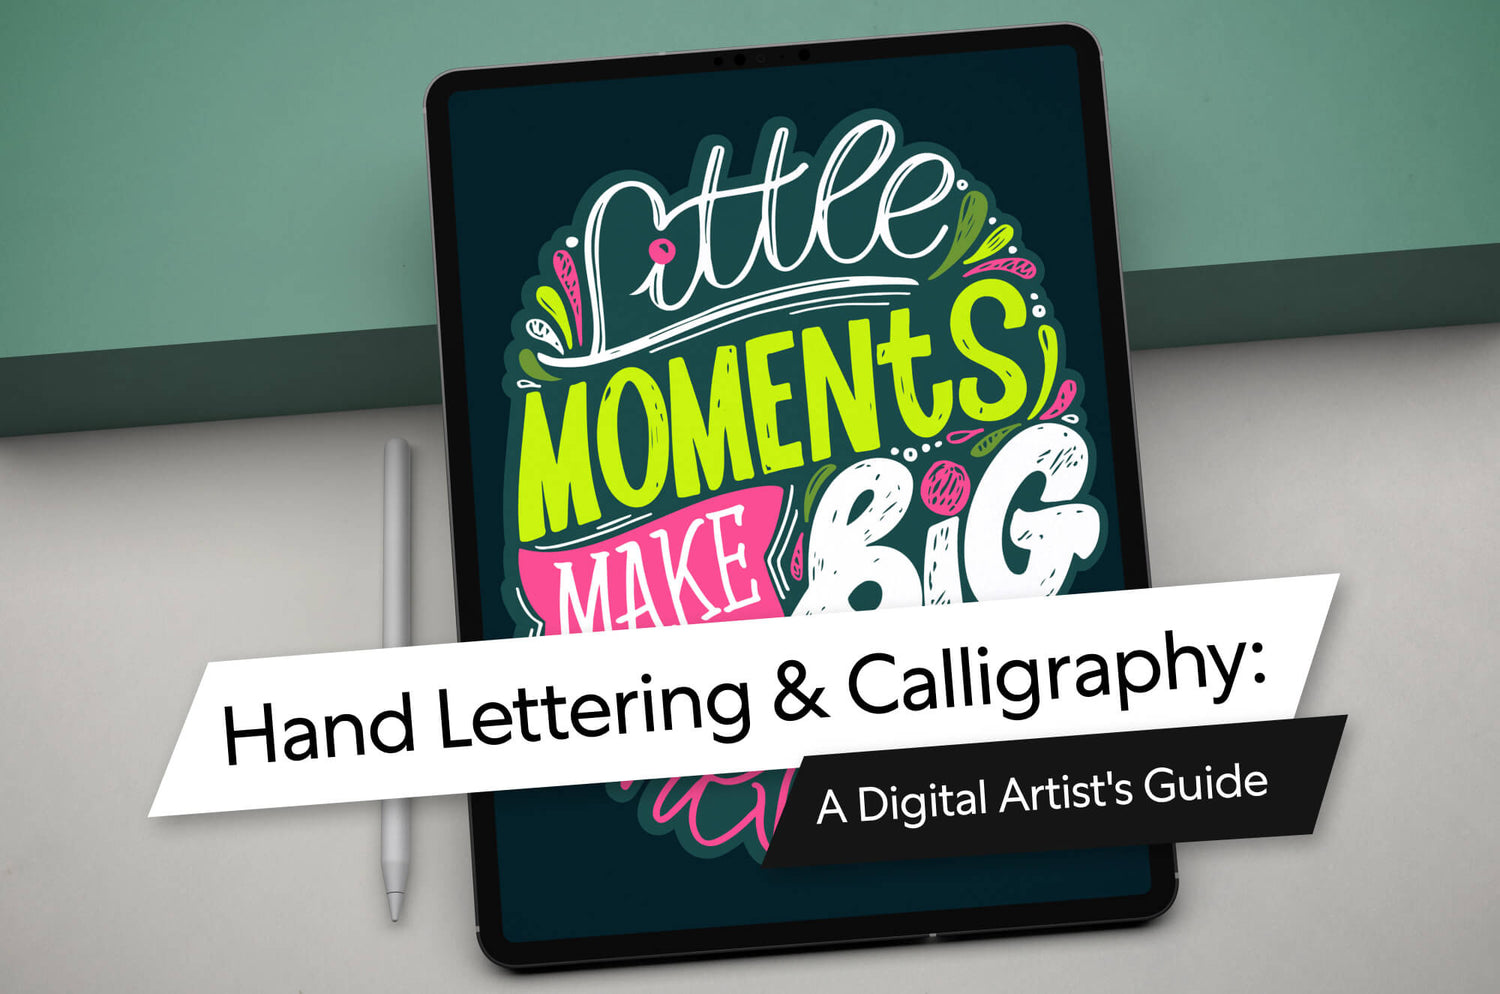 Hand Lettering & Calligraphy: A Digital Artist's Guide